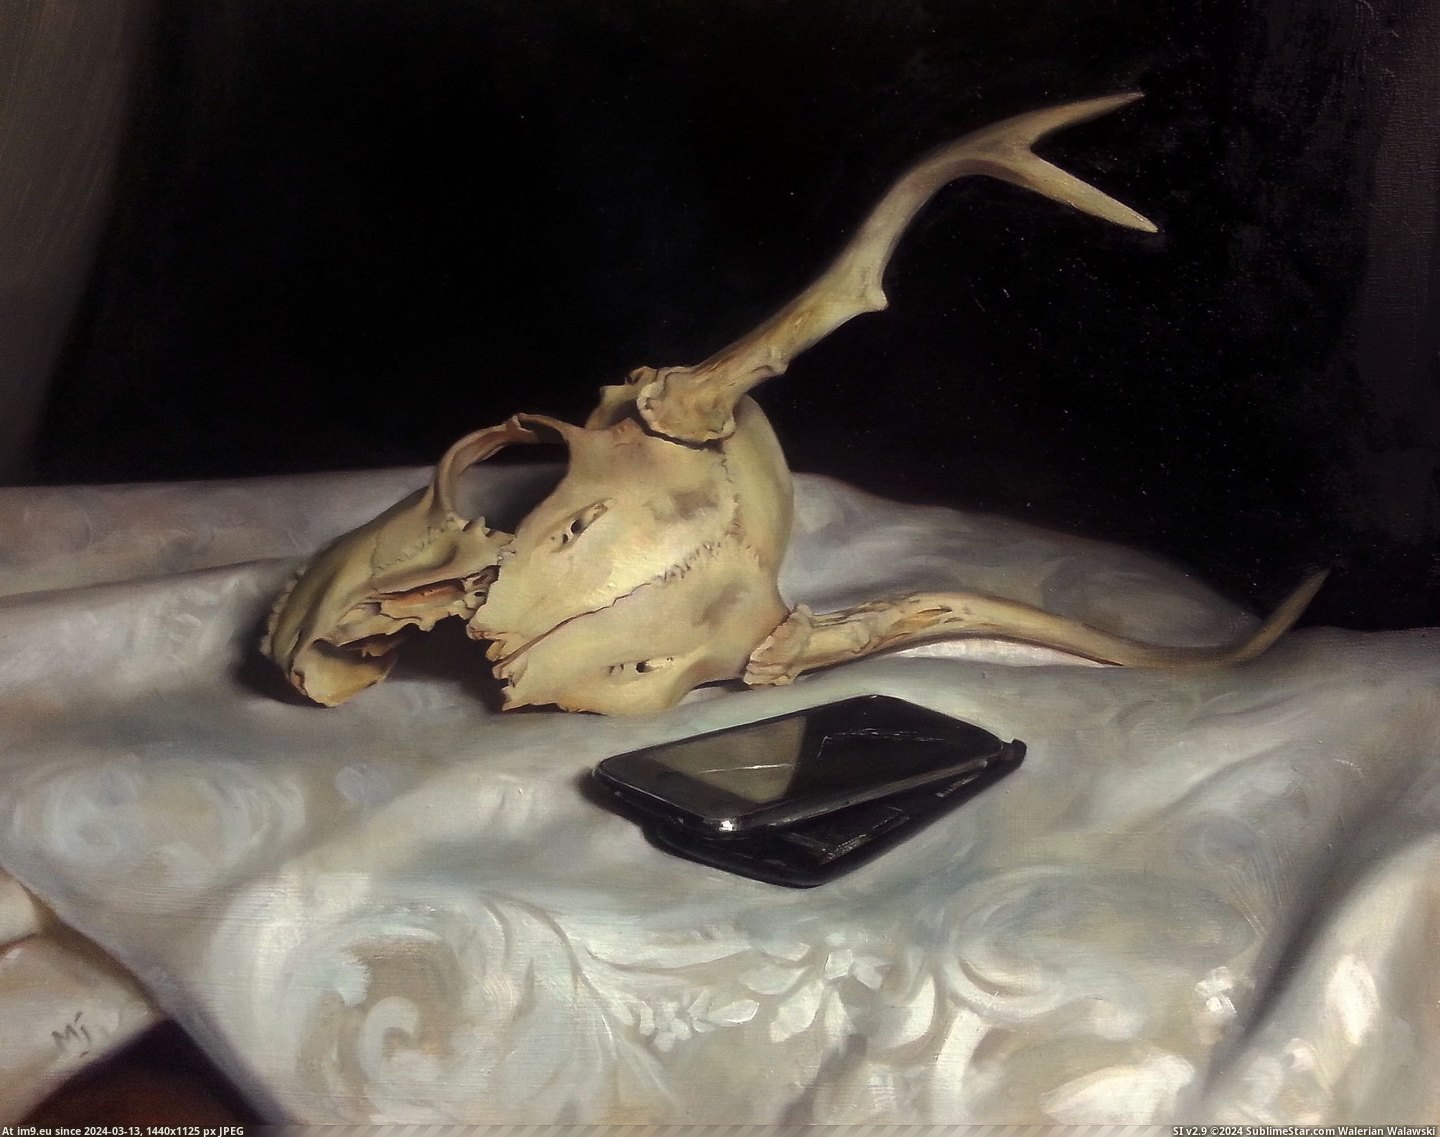 #For #Time #Old #Painting #Project #Finished #Broken #Skull #Life #Shit #Phone #Load [Pics] I just finished painting an old broken phone and skull for a still life project from life, it took a shit load of time an Pic. (Image of album My r/PICS favs))